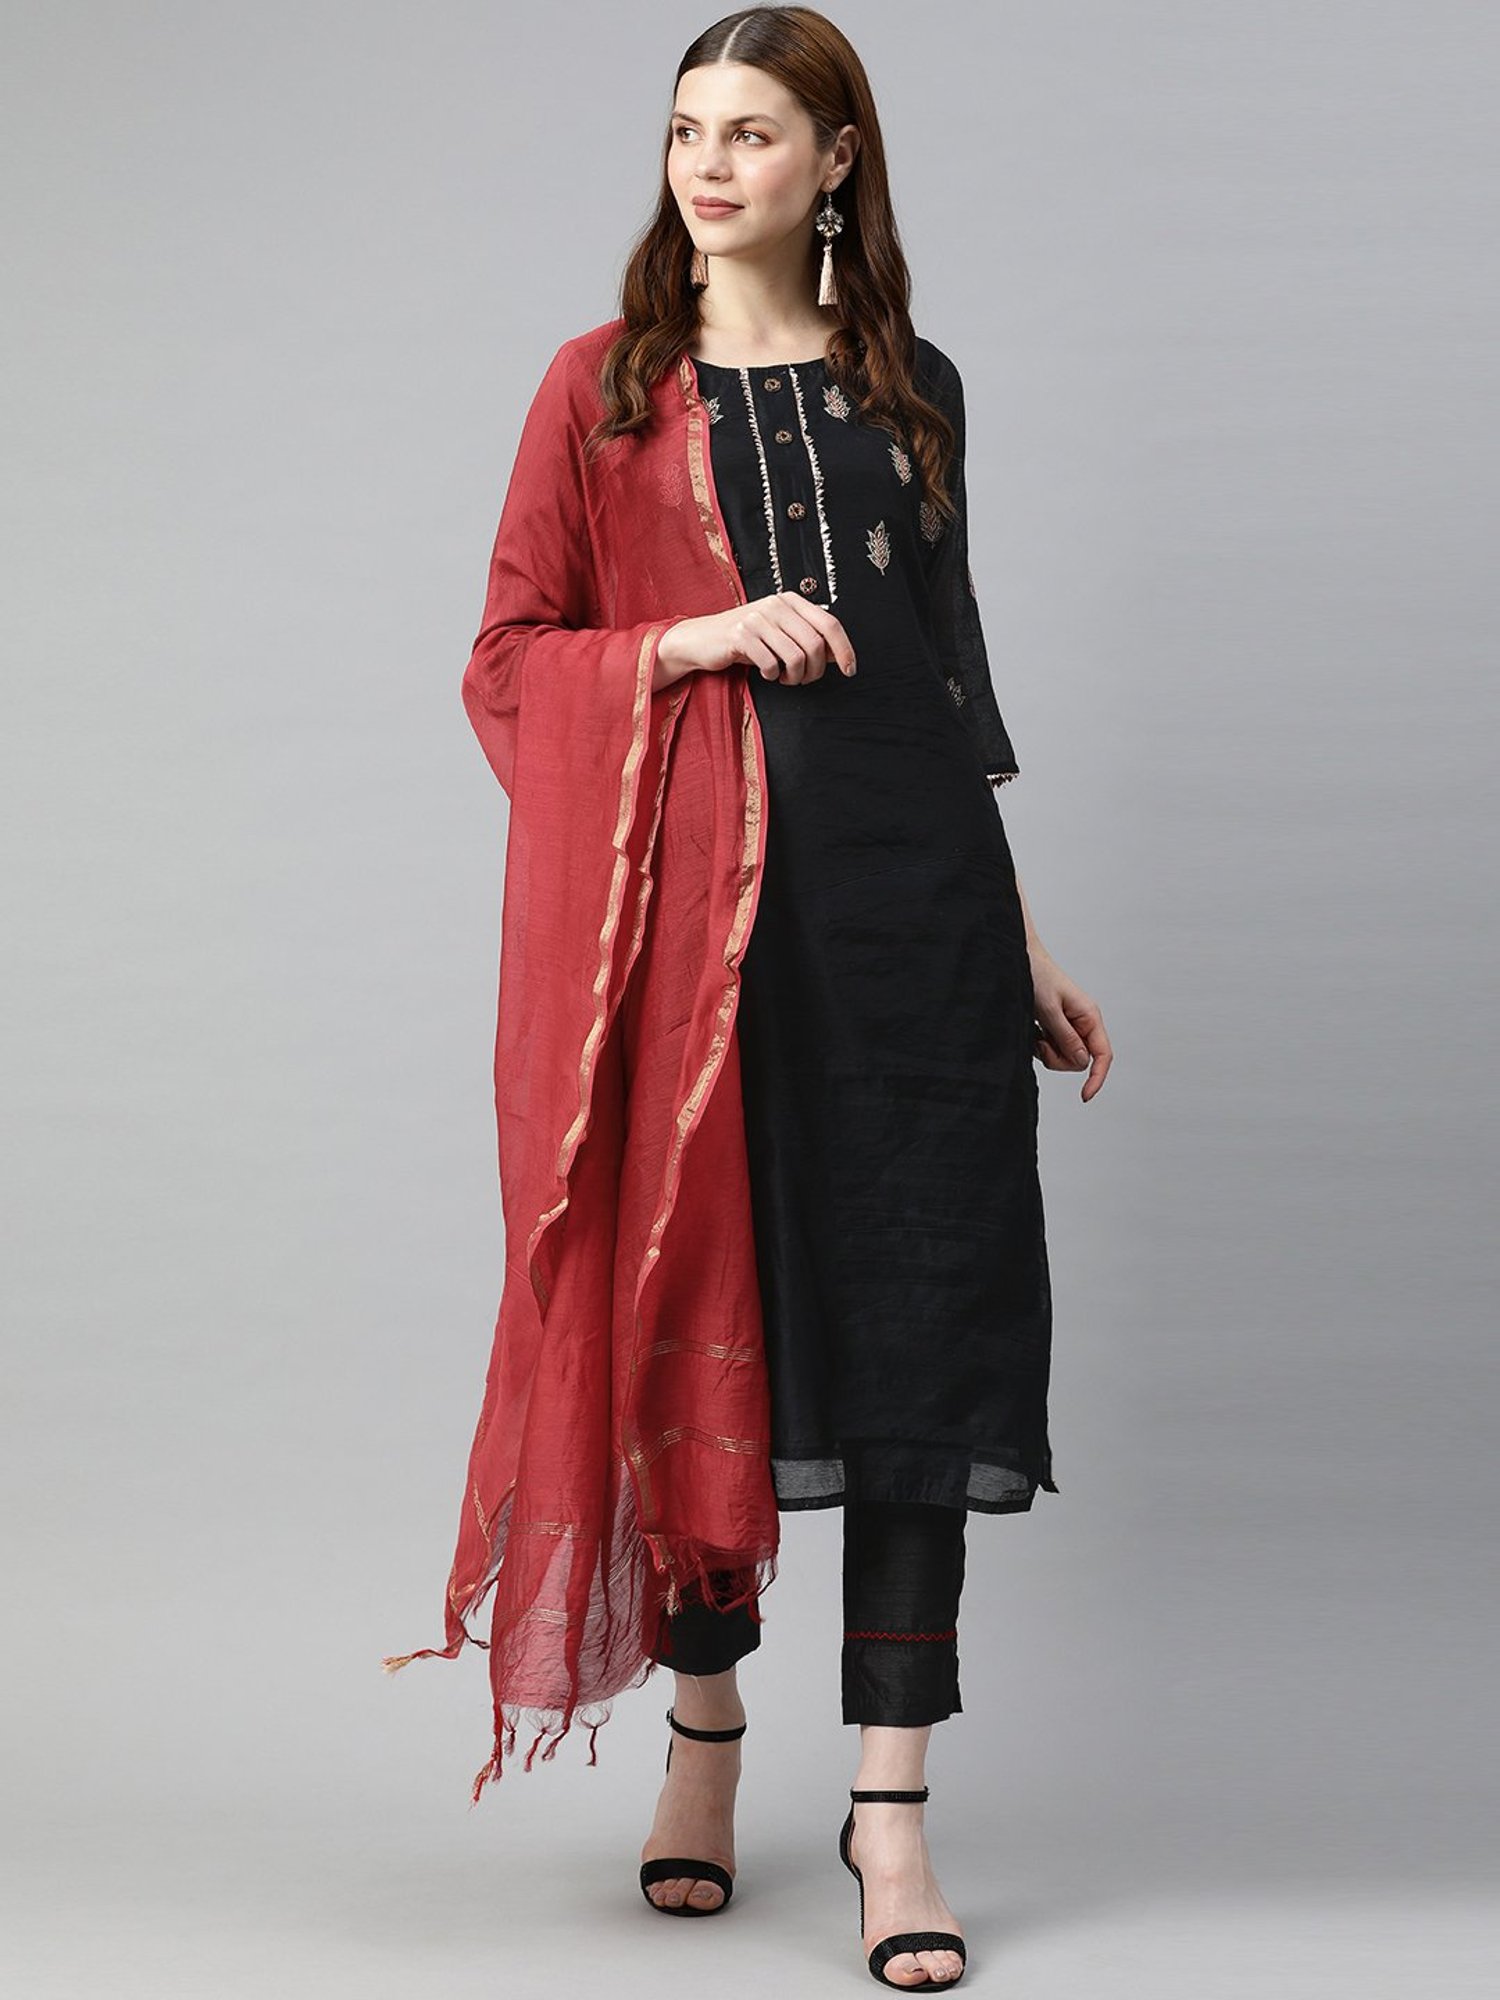 Buy Mevika Black Kurti With Pant And Dupatta Online at Best Prices in India   JioMart